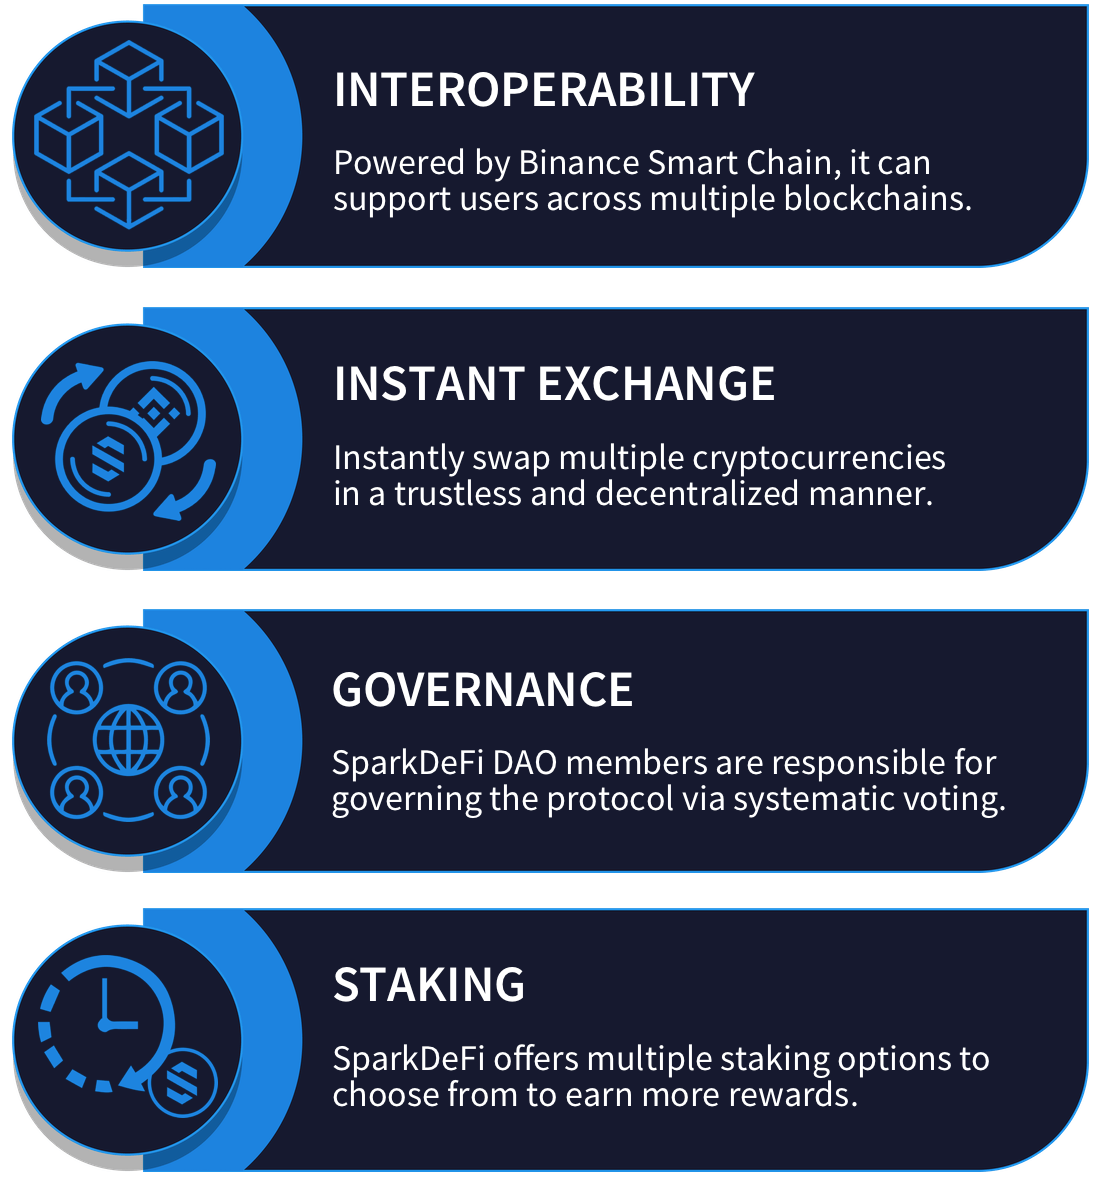 Key Features Infographic